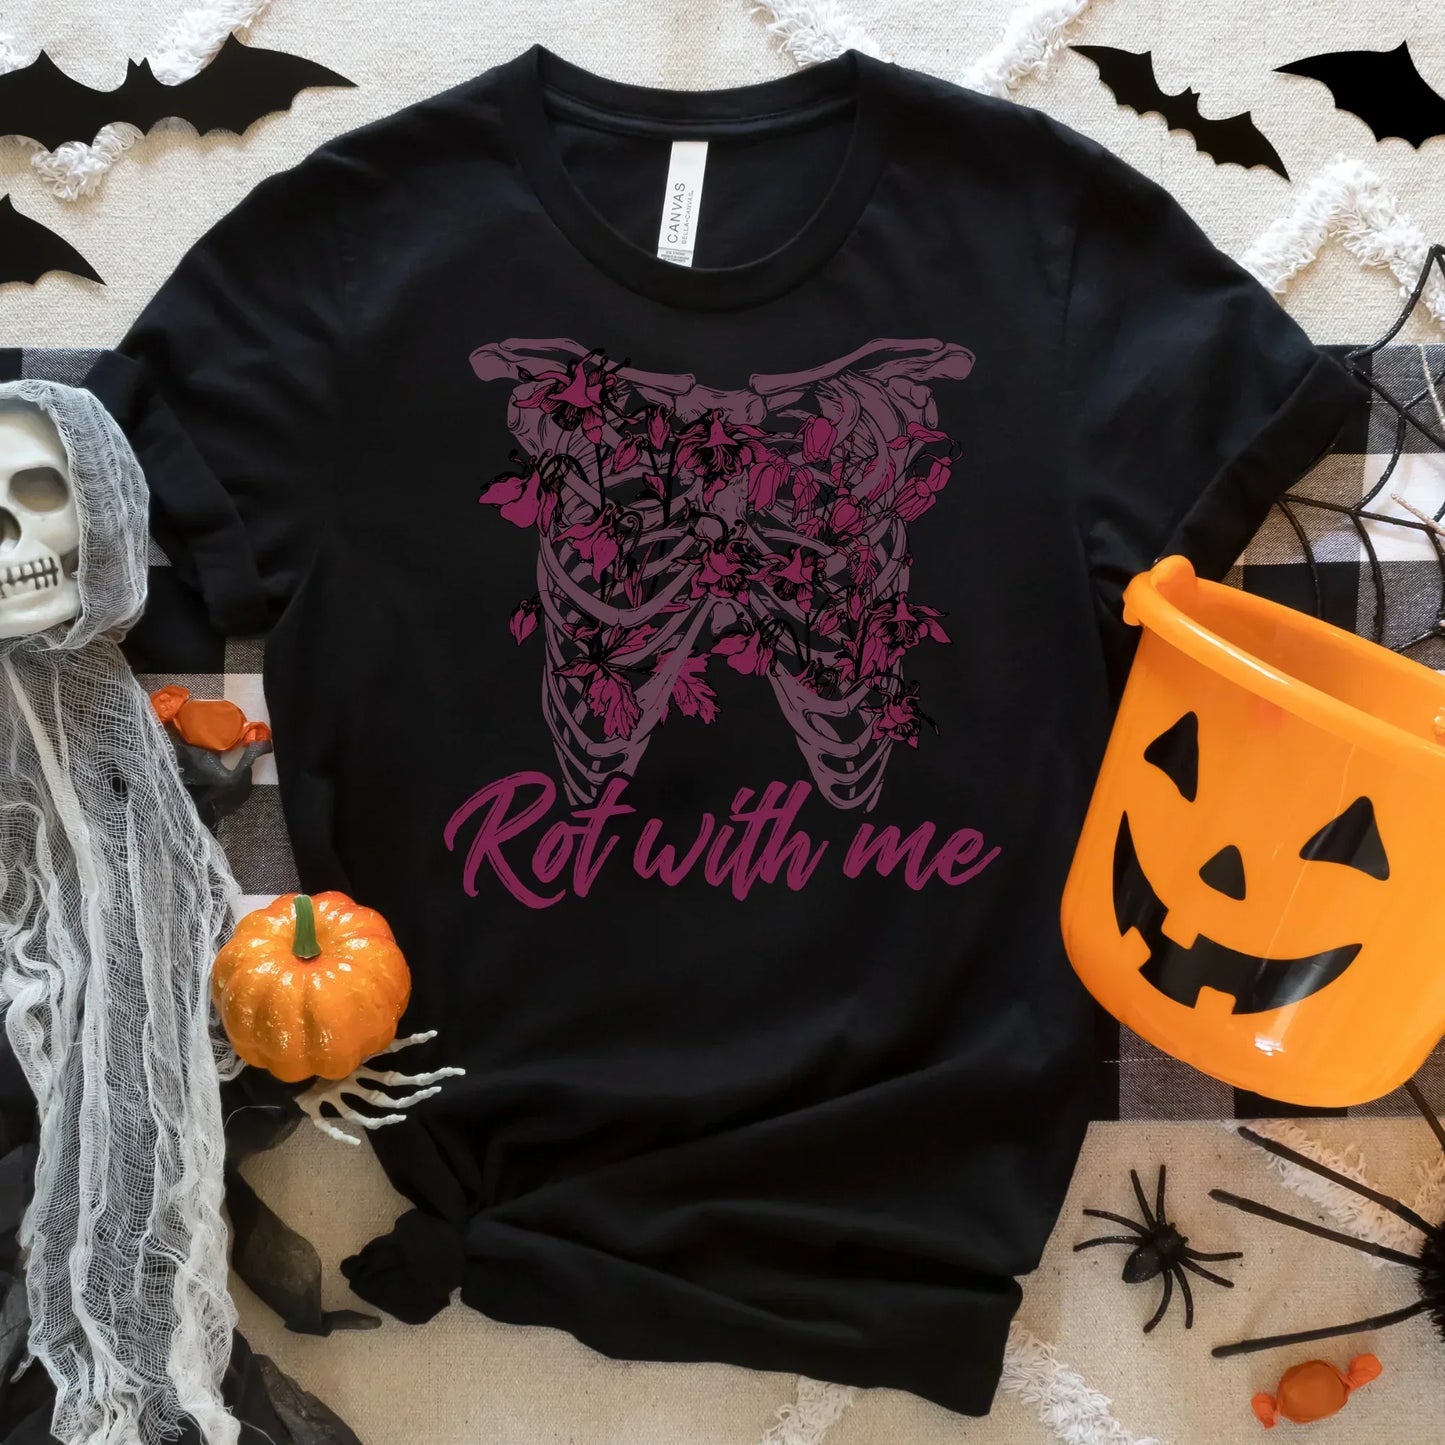 Rot with Me, Gothic Shirt, Halloween Sweatshirt, Witchy Vibes, Bats & Dead Roses Shirt, Moon Shirt, Magical Witch Shirt, Goth Style, Rot with Me, EMO Tee HMDesignStudioUS